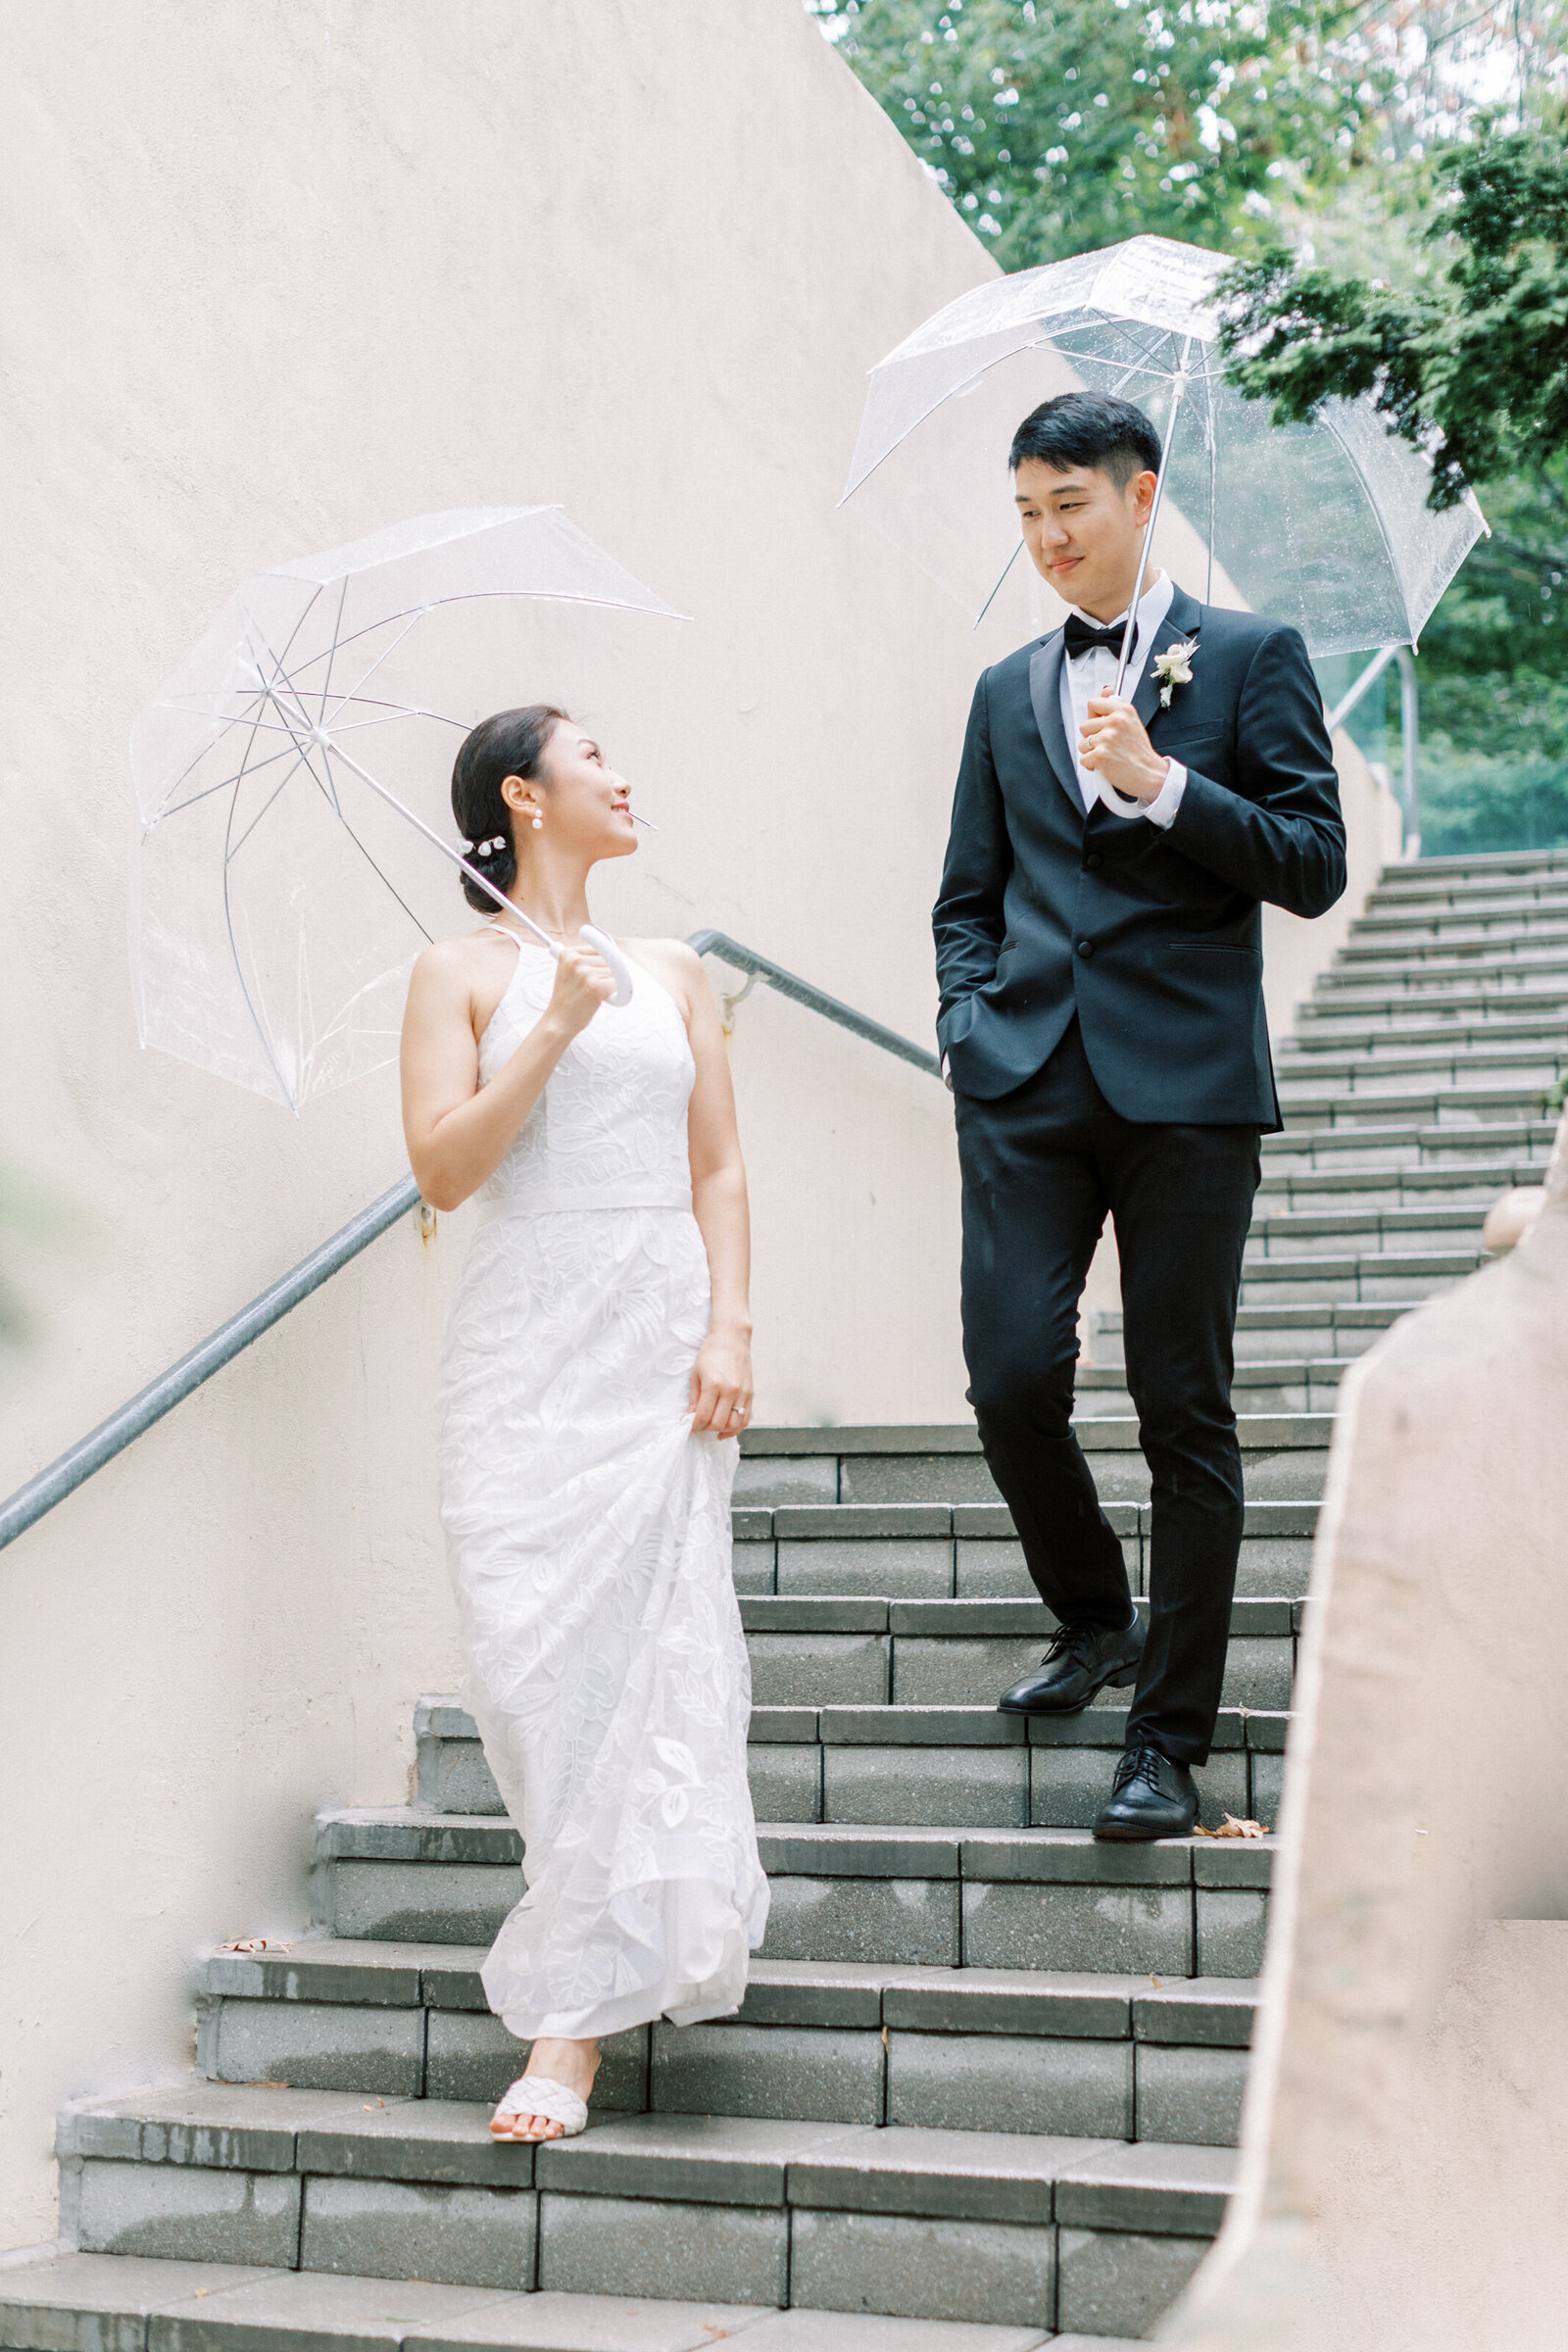 Wedding couples walk down the stairs together